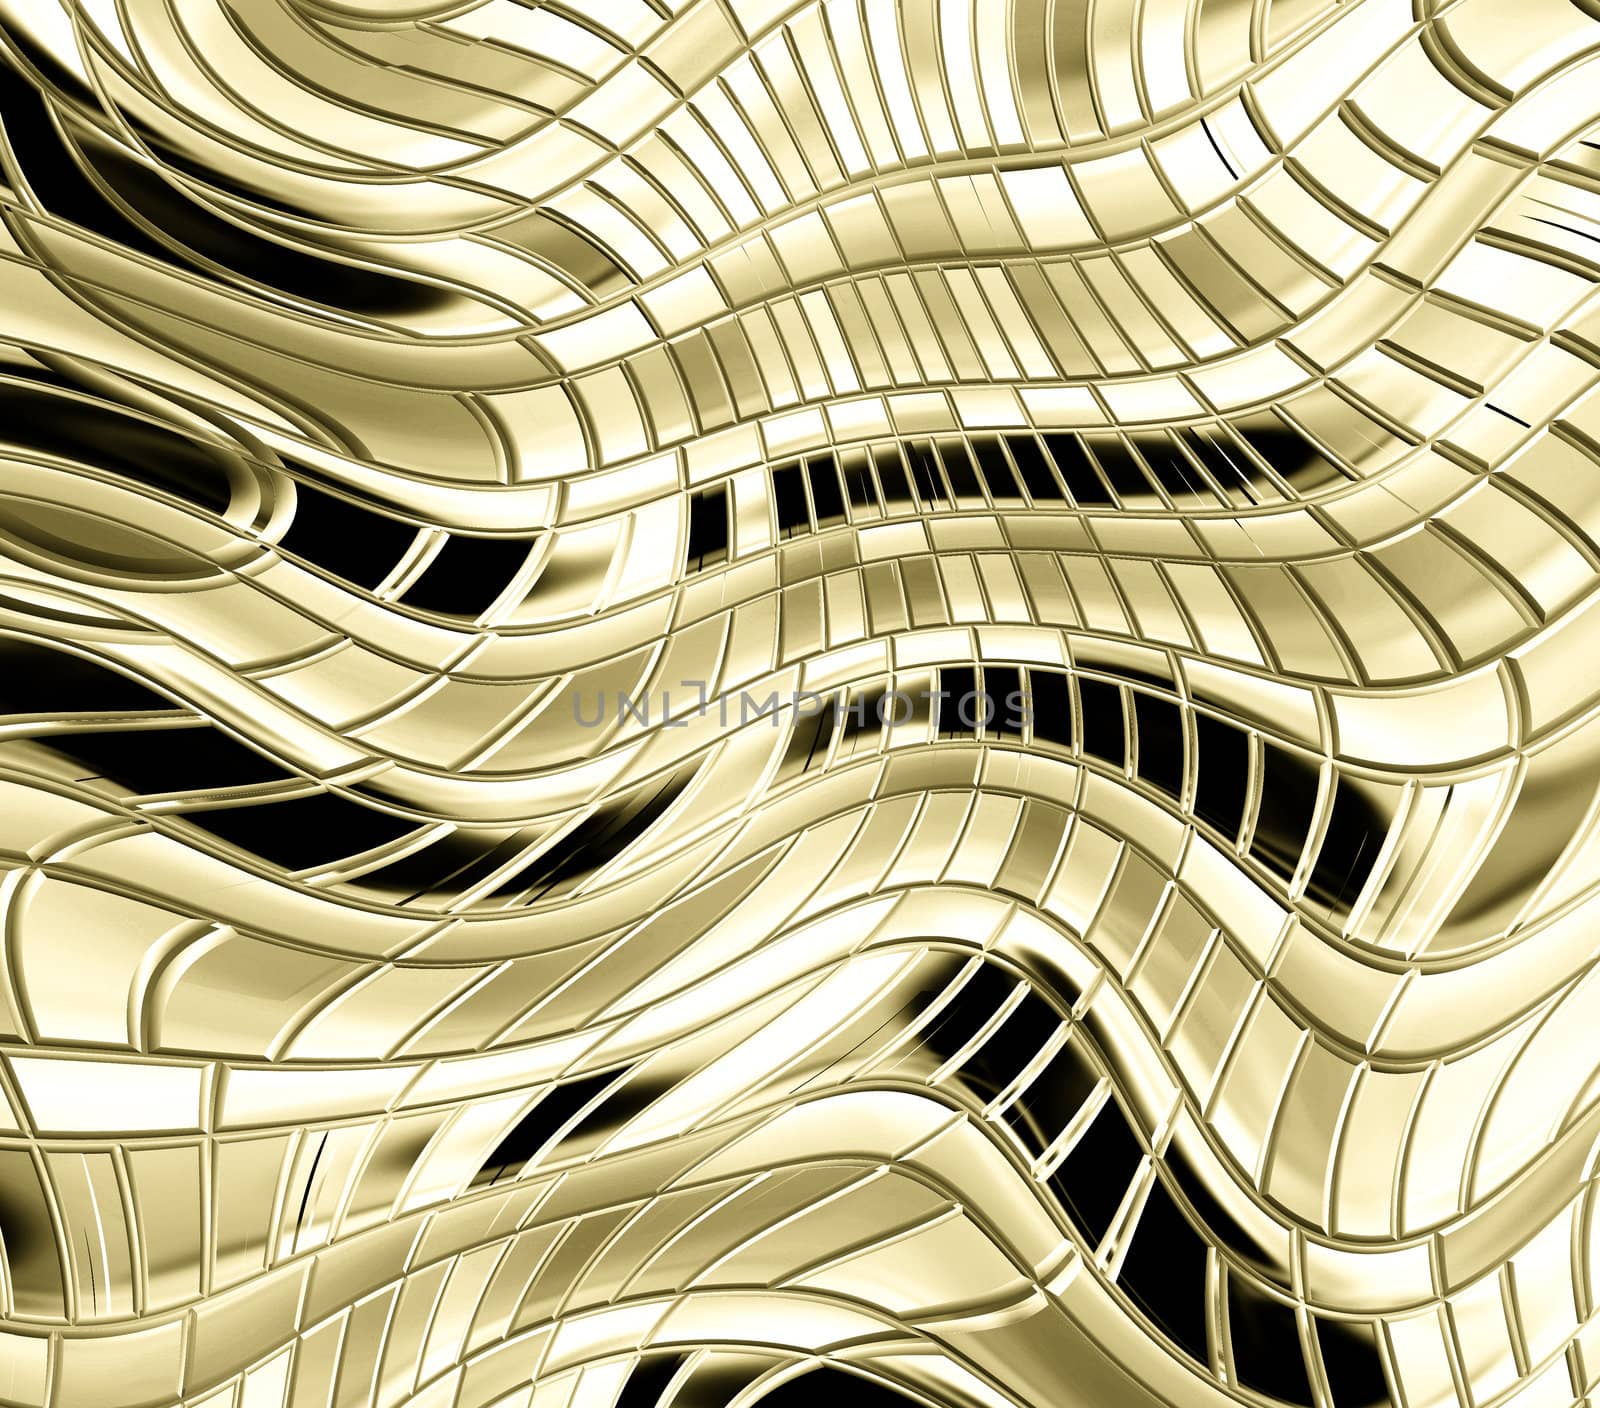  abstract gold metal background by clearviewstock